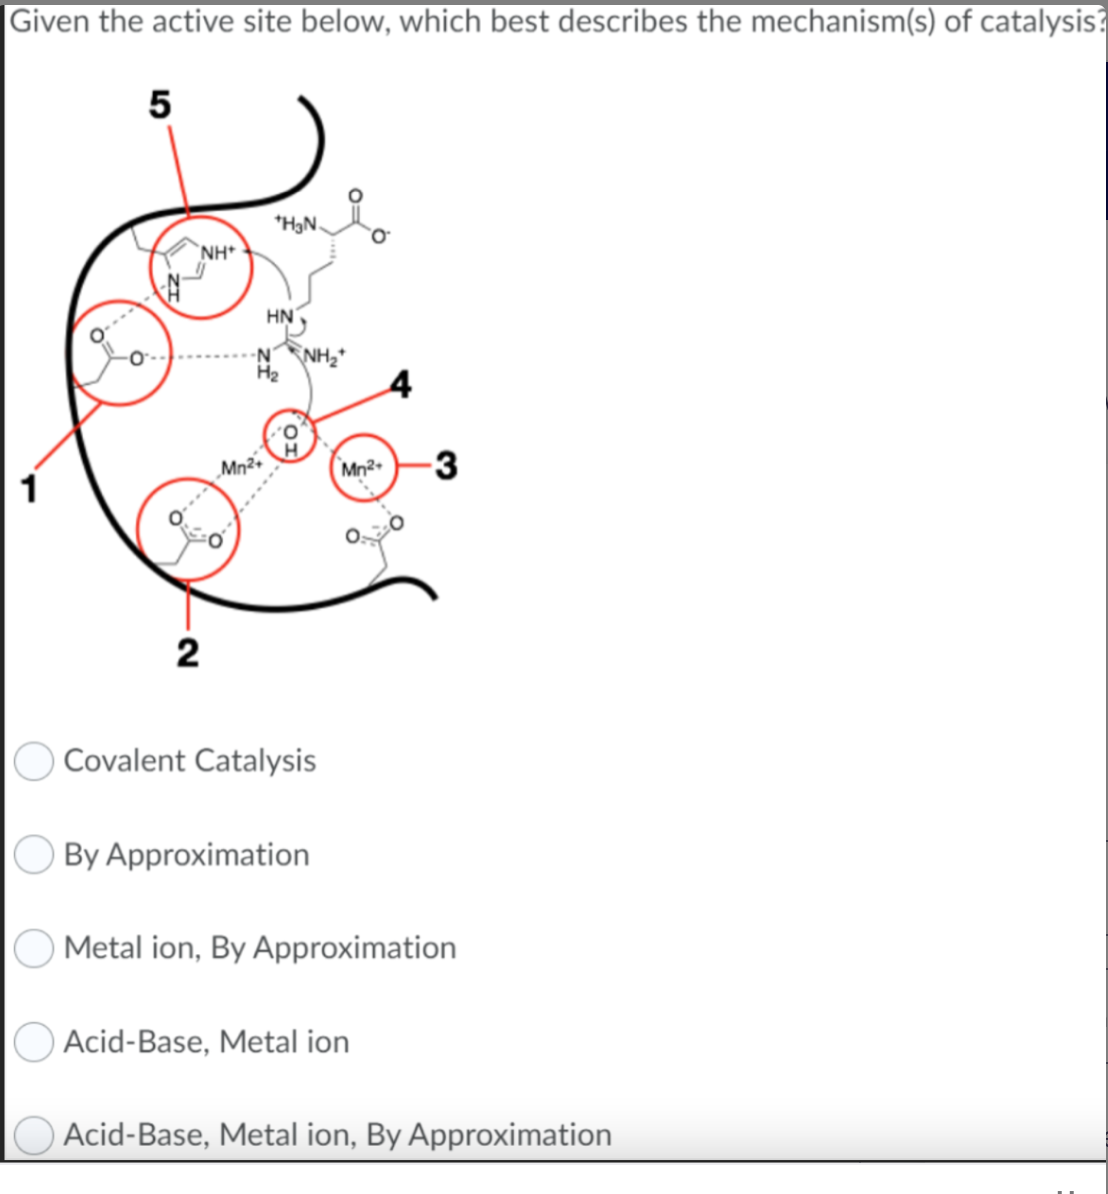 Given the active site below, which best describes the mechanism(s) of catalysis?
5
NH*
2
-N
+H3N.
HN
Mn²+
H₂
Covalent Catalysis
By Approximation
Mn²+
-3
Metal ion, By Approximation
Acid-Base, Metal ion
Acid-Base, Metal ion, By Approximation